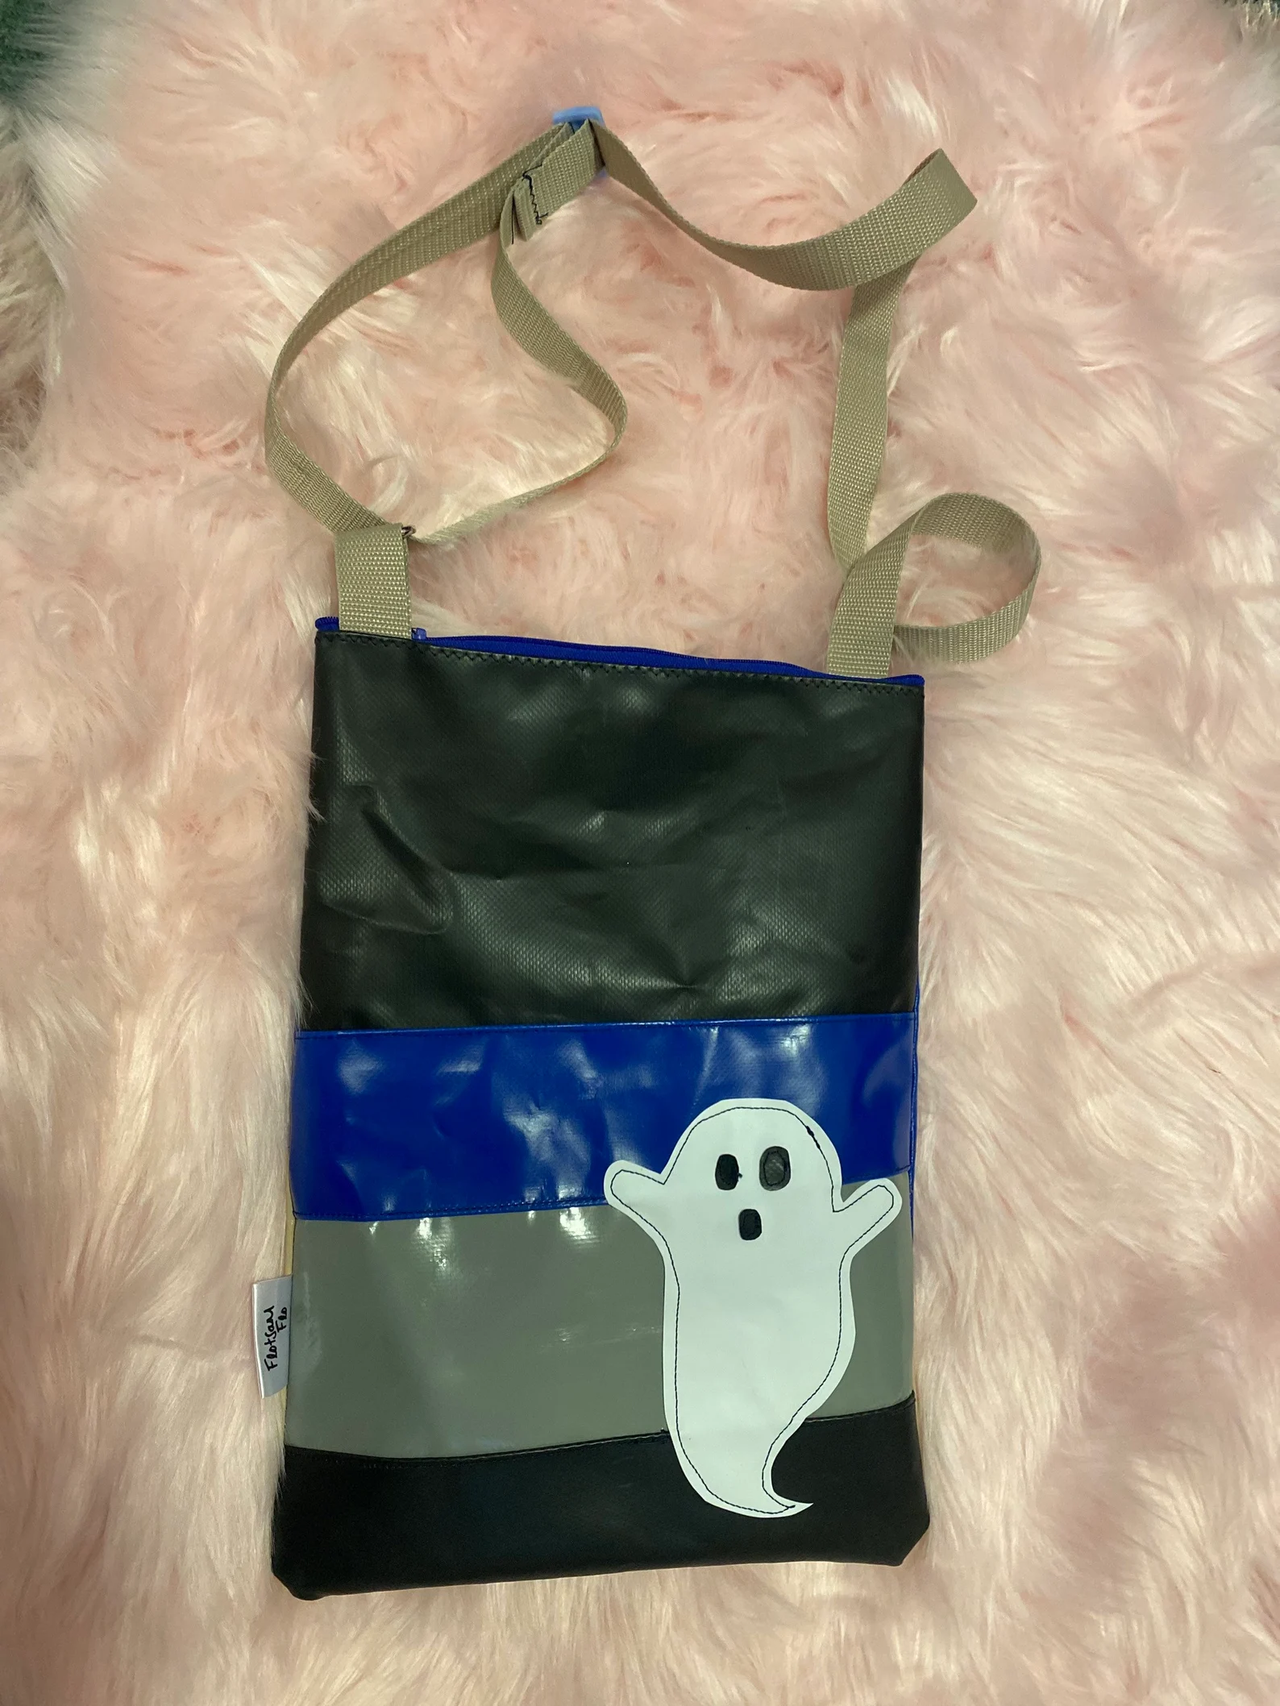 I used to be off cuts of canopies - Ghost crossbody bag - Halloween Limited edition - Handmade and Upcycled